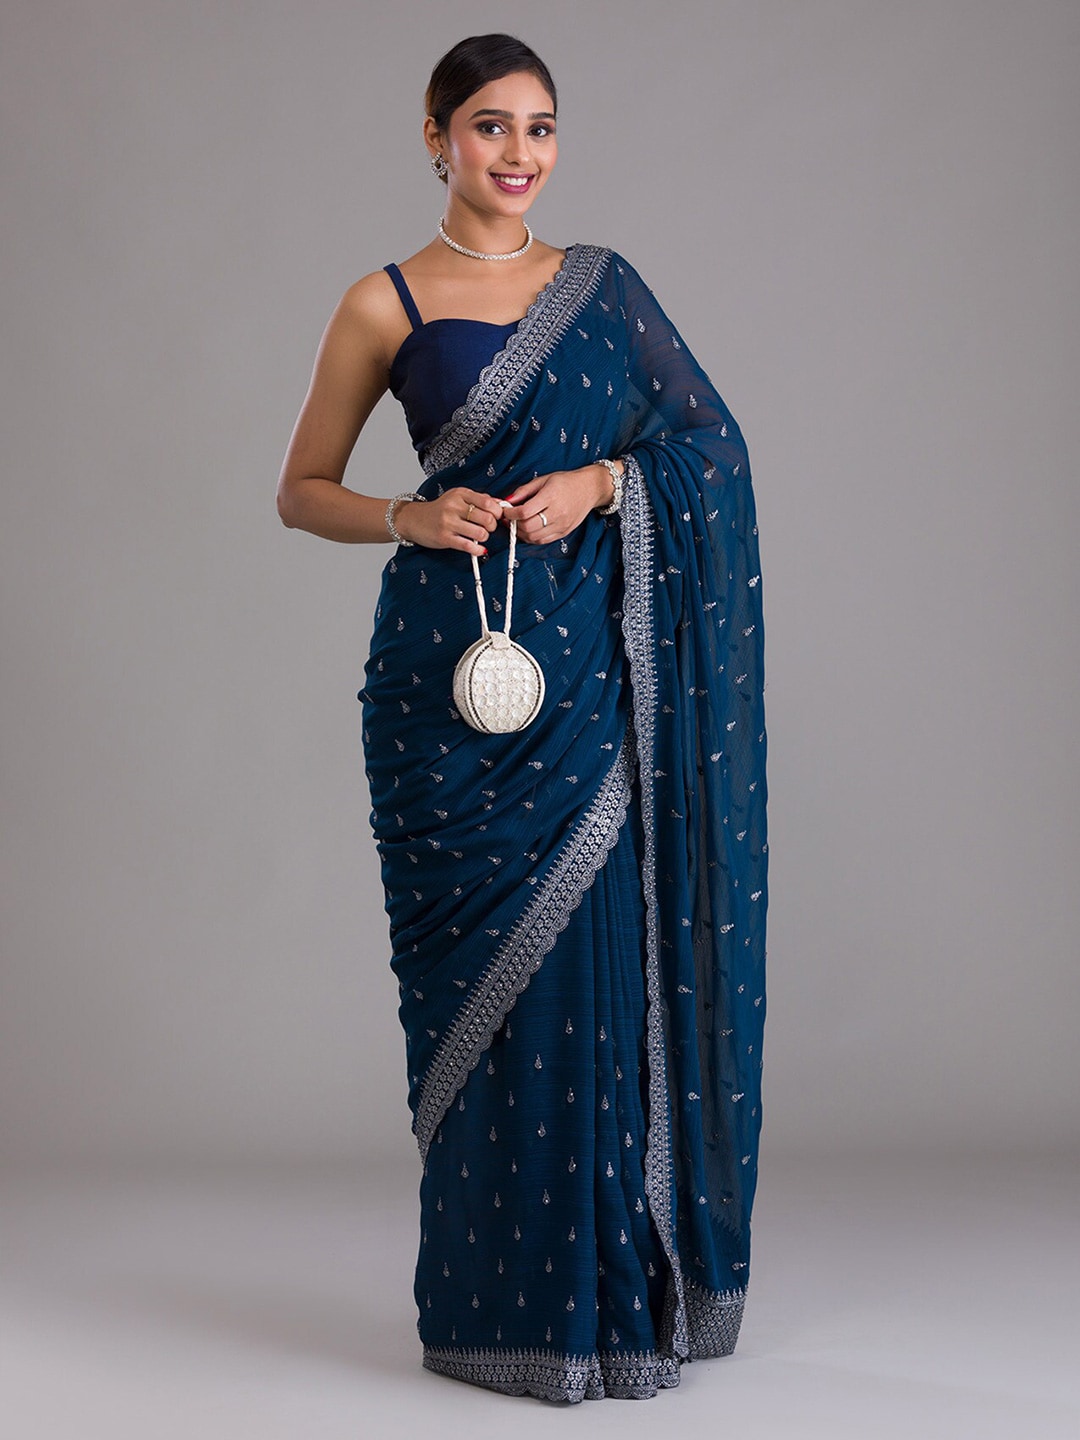 Koskii Blue & Silver-Toned Embellished Beads and Stones Heavy Work Saree Price in India